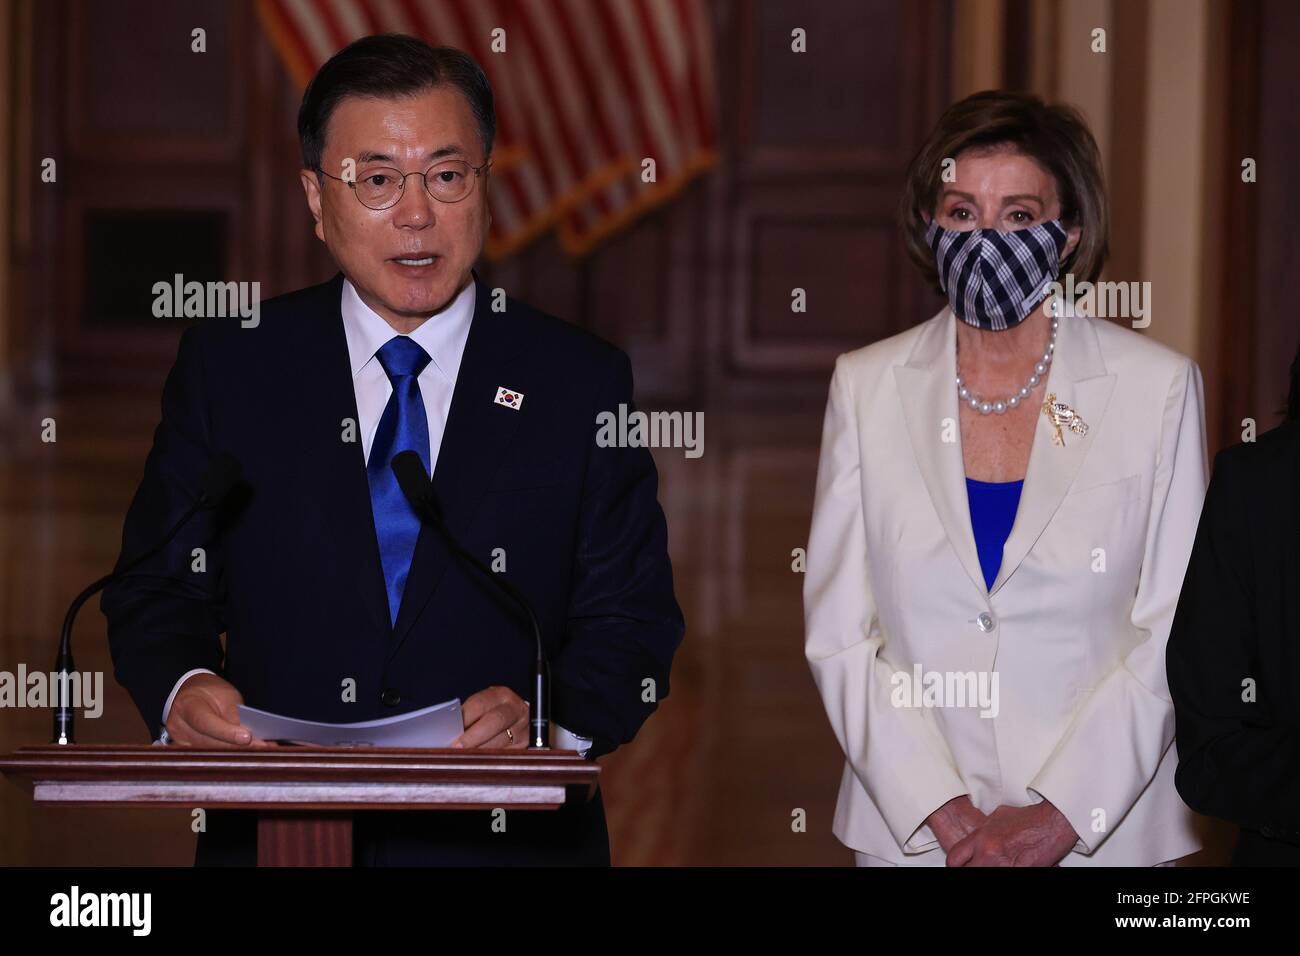 Washington, United States. 20th May, 2021. Korean President Moon Jae-in (L) and Speaker of the House Nancy Pelosi deliver brief remarks at her offices at the U.S. Capitol on Thursday, May 20, 2021 in Washington, DC. Moon will also visit the White House to meet with U.S. President Joe Biden to discuss North Korea, the coronavirus vaccine rollout and other topics on Friday. Pool Photo by Chip Somodevilla/UPI Credit: UPI/Alamy Live News Stock Photo